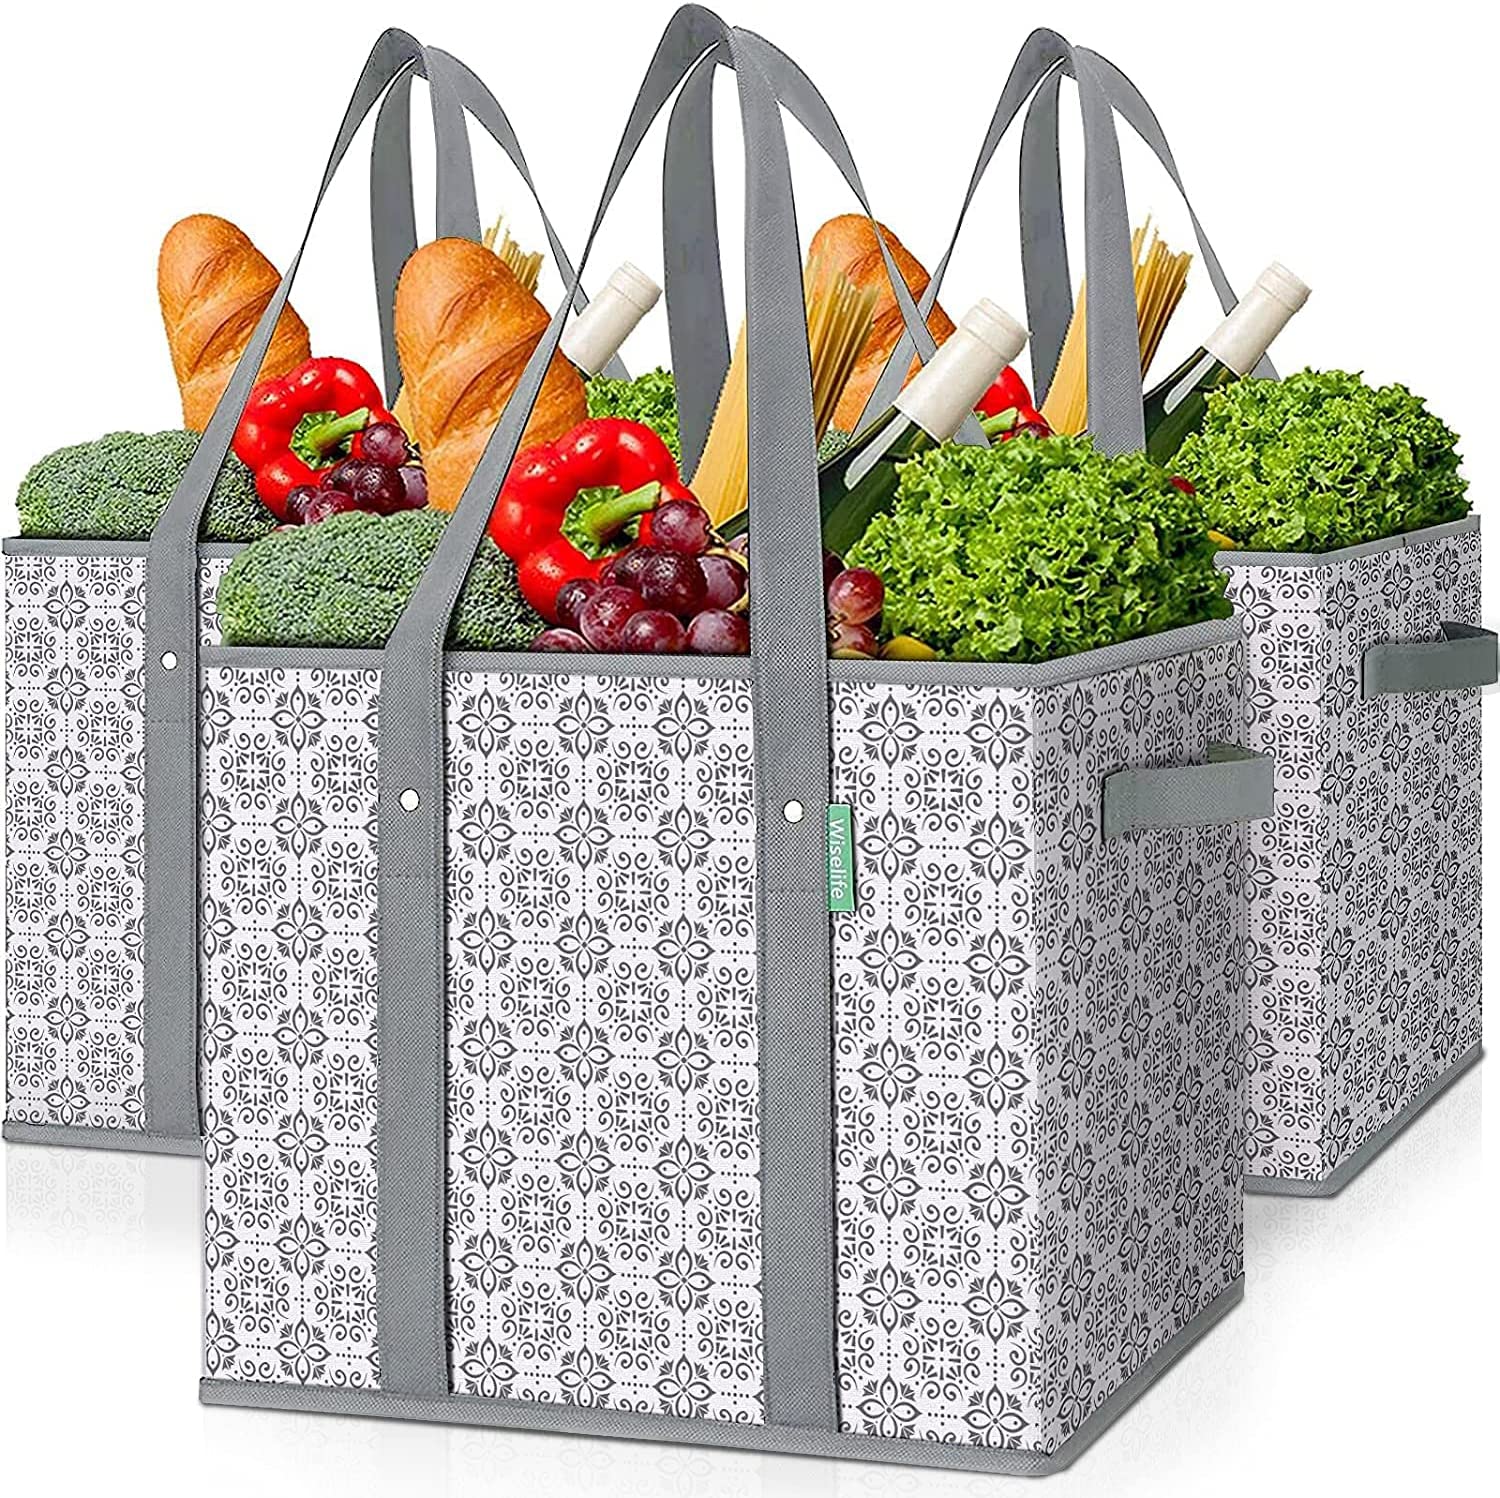 The WISELIFE Reusable Large Grocery Bags